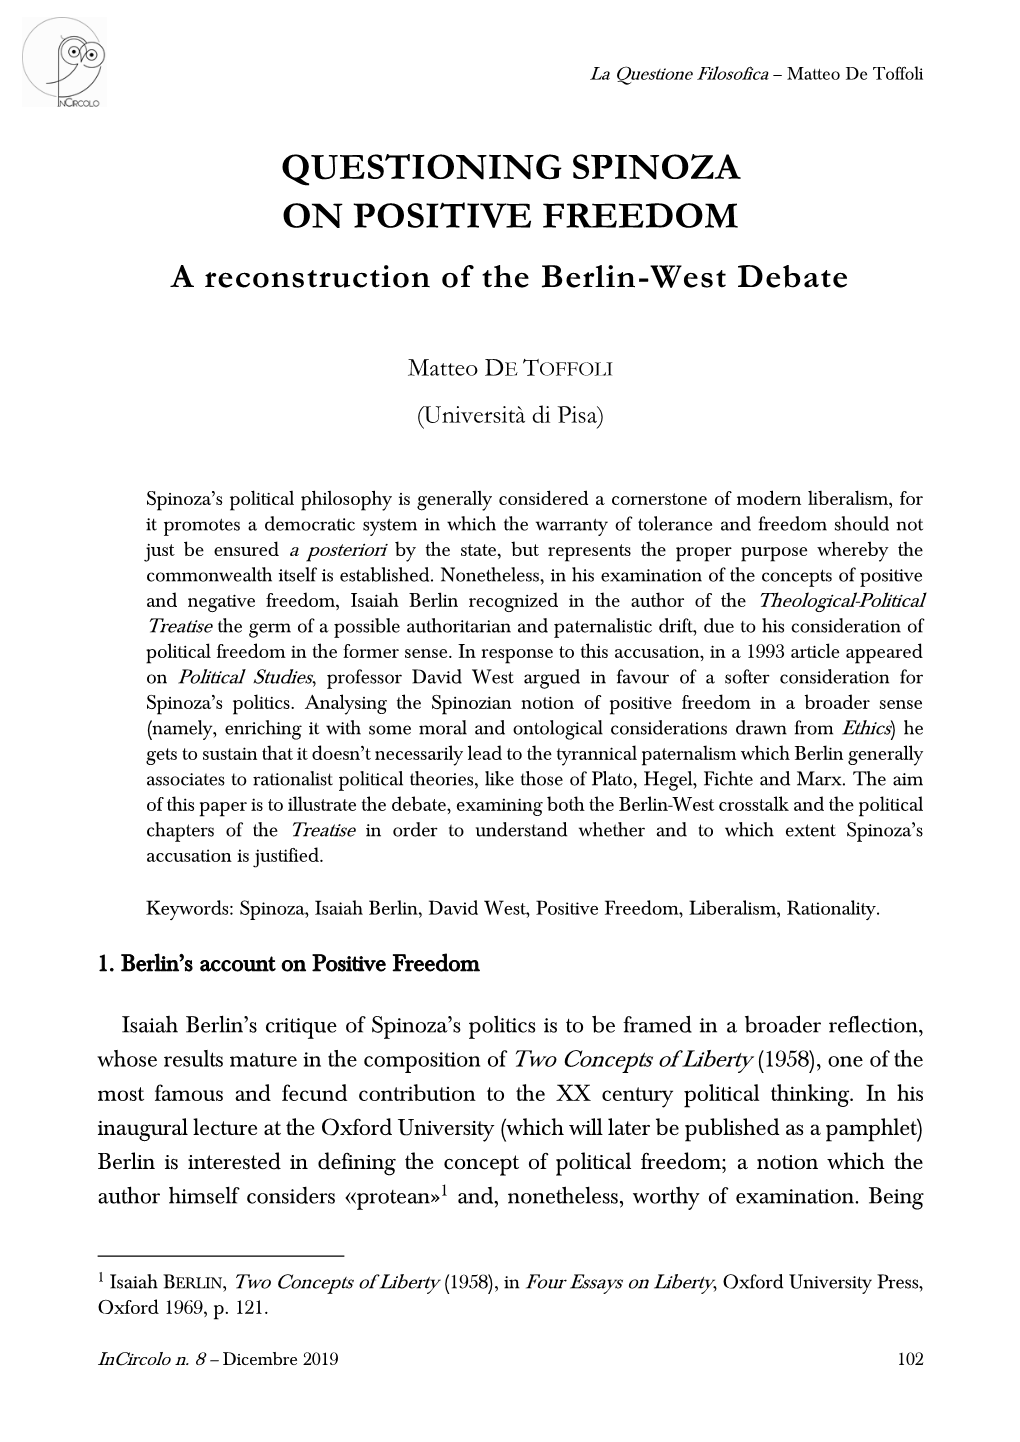 QUESTIONING SPINOZA on POSITIVE FREEDOM a Reconstruction of the Berlin-West Debate